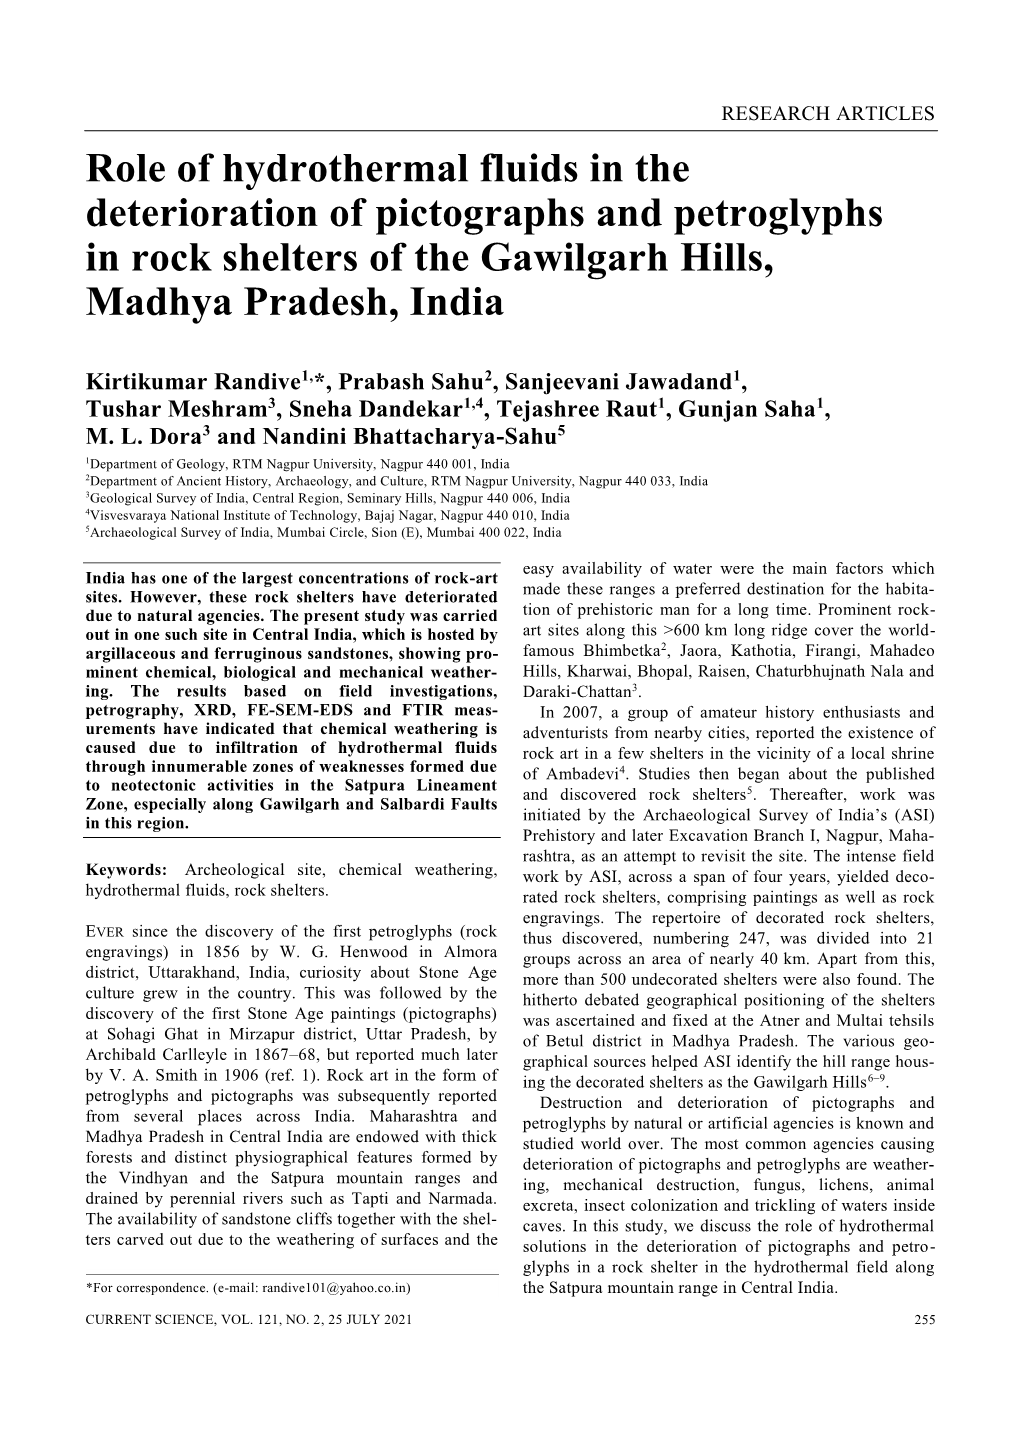 Role of Hydrothermal Fluids in the Deterioration of Pictographs and Petroglyphs in Rock Shelters of the Gawilgarh Hills, Madhya Pradesh, India